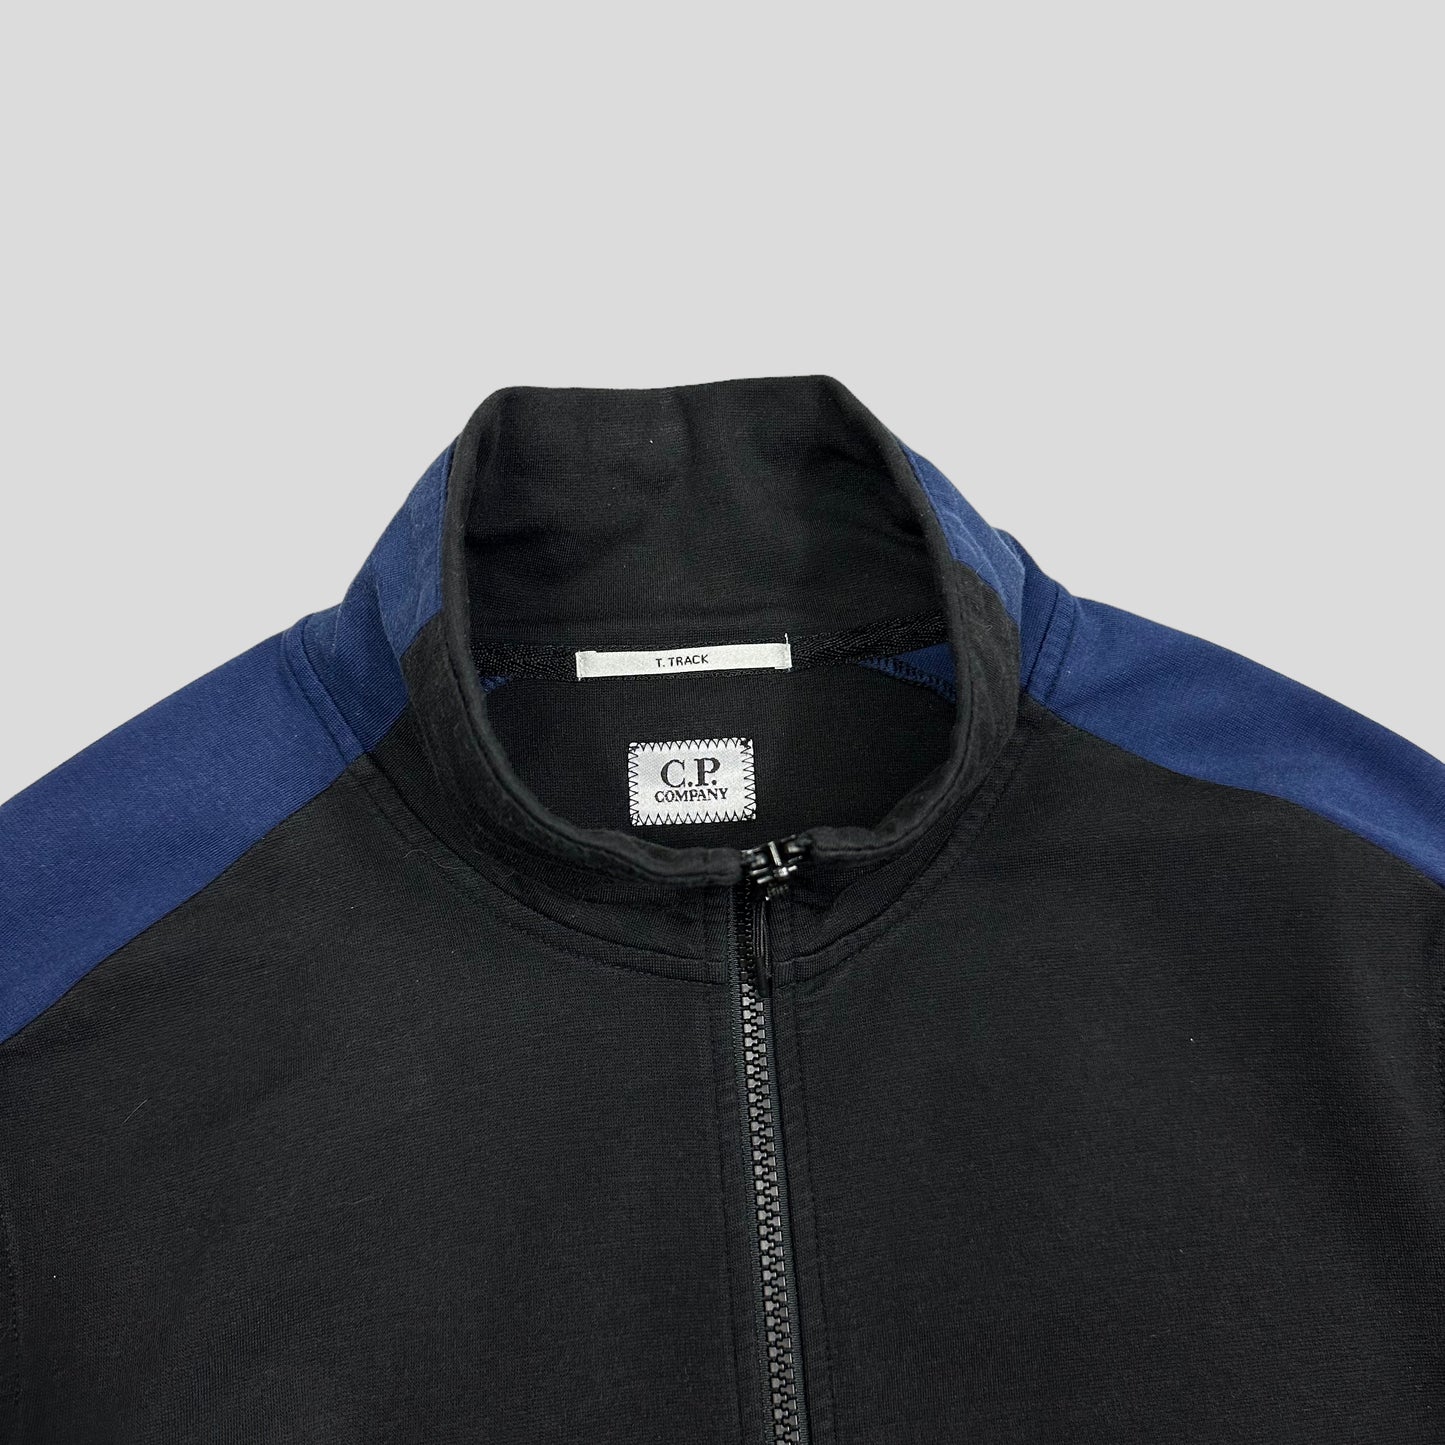 CP Company T.track Panelled Lens Jacket - S/M